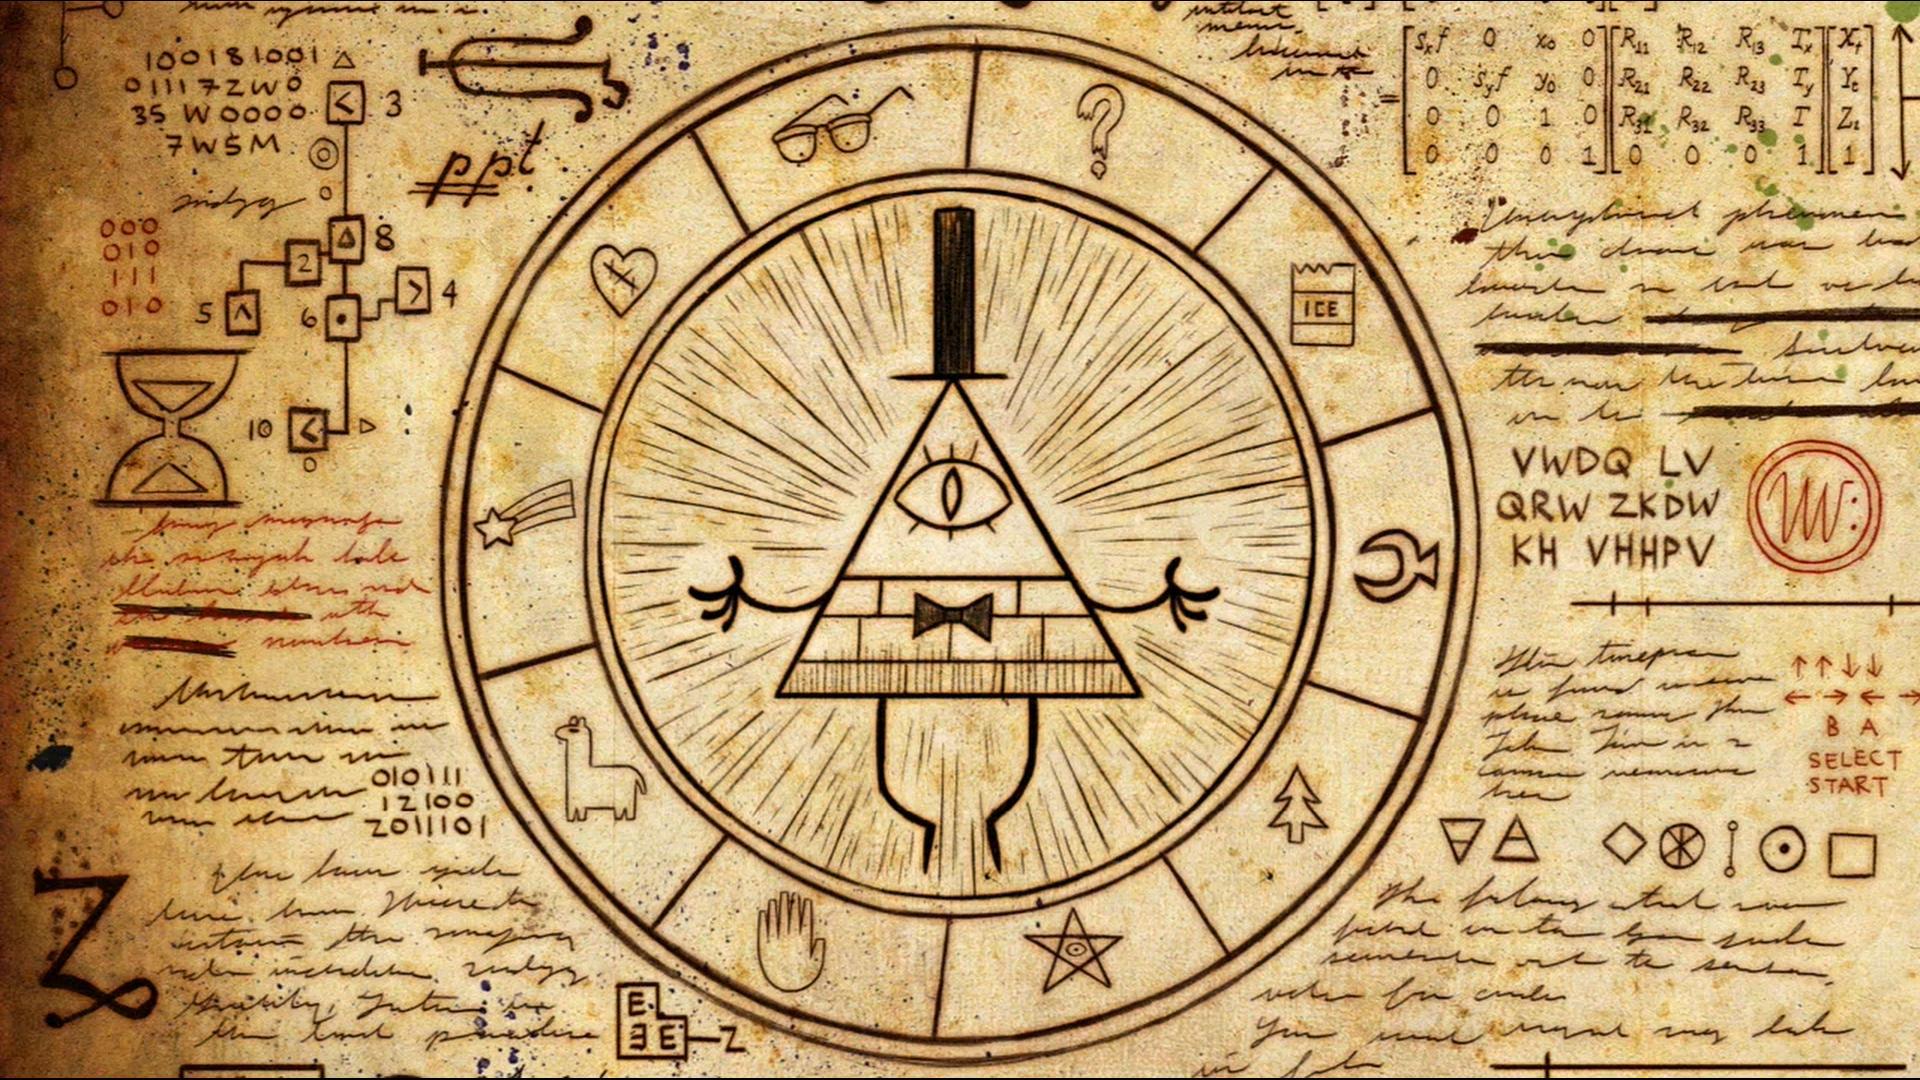 Gravity Falls HD Wallpaper and Background